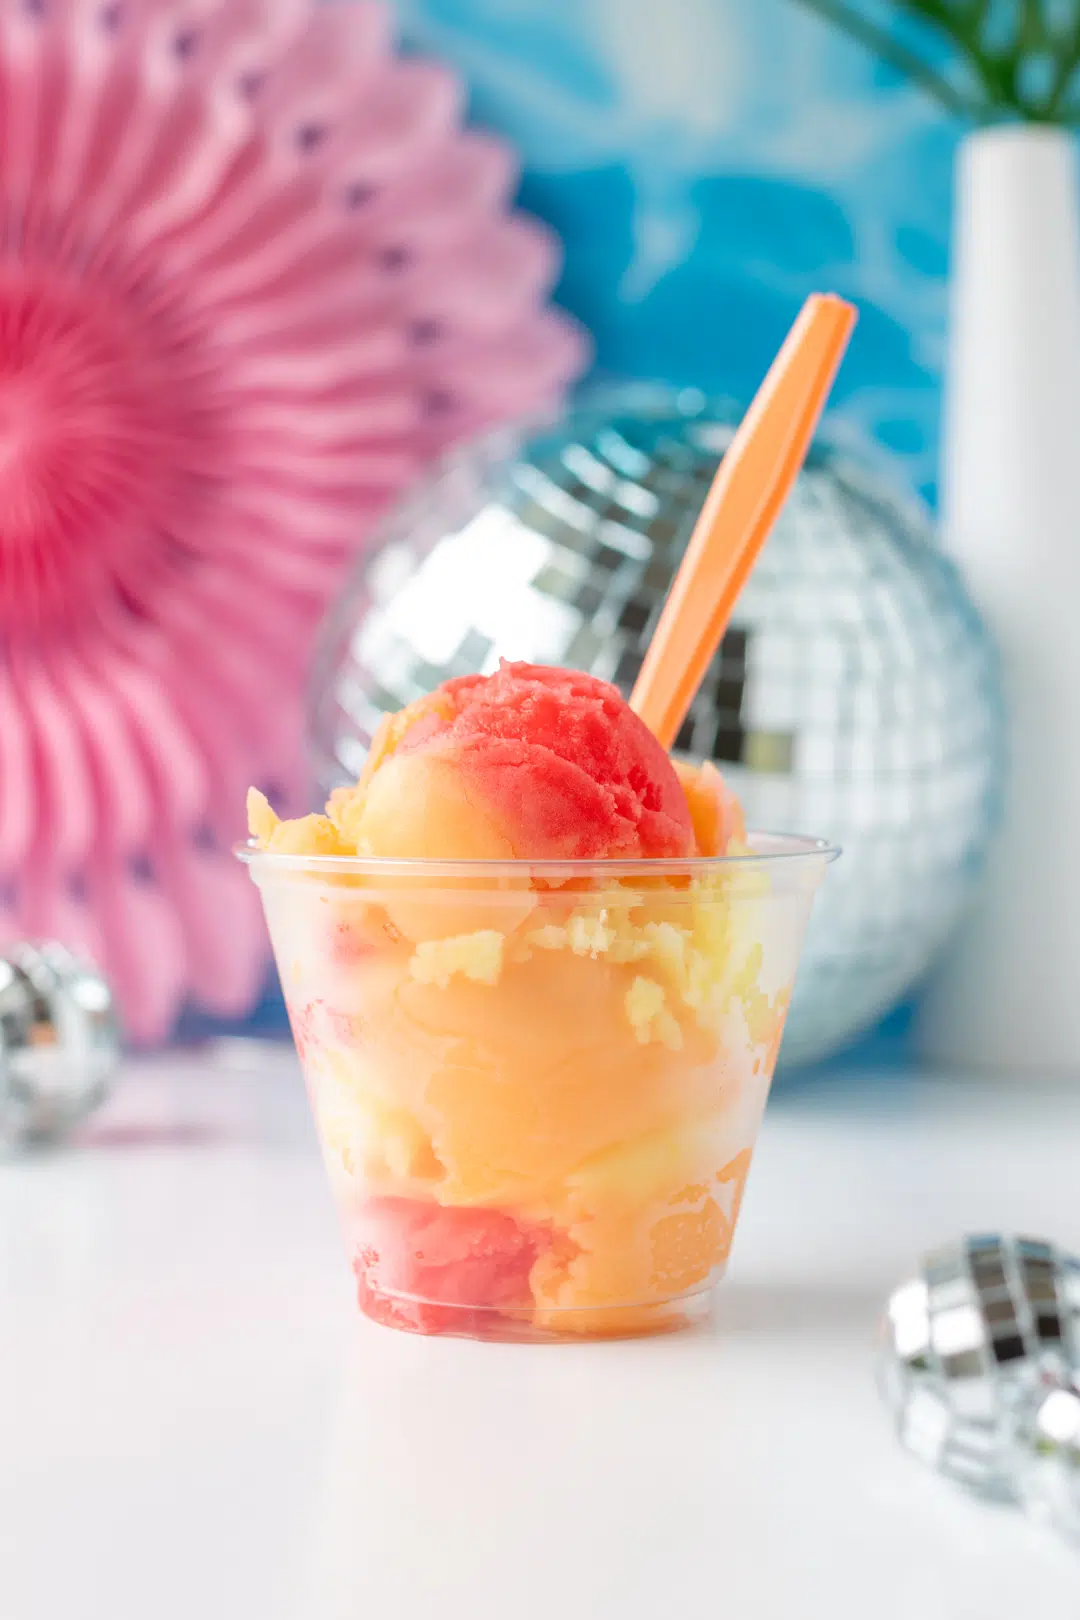 Scoop Up Summer Fun with This Colorful Tropical Italian Ice Hack